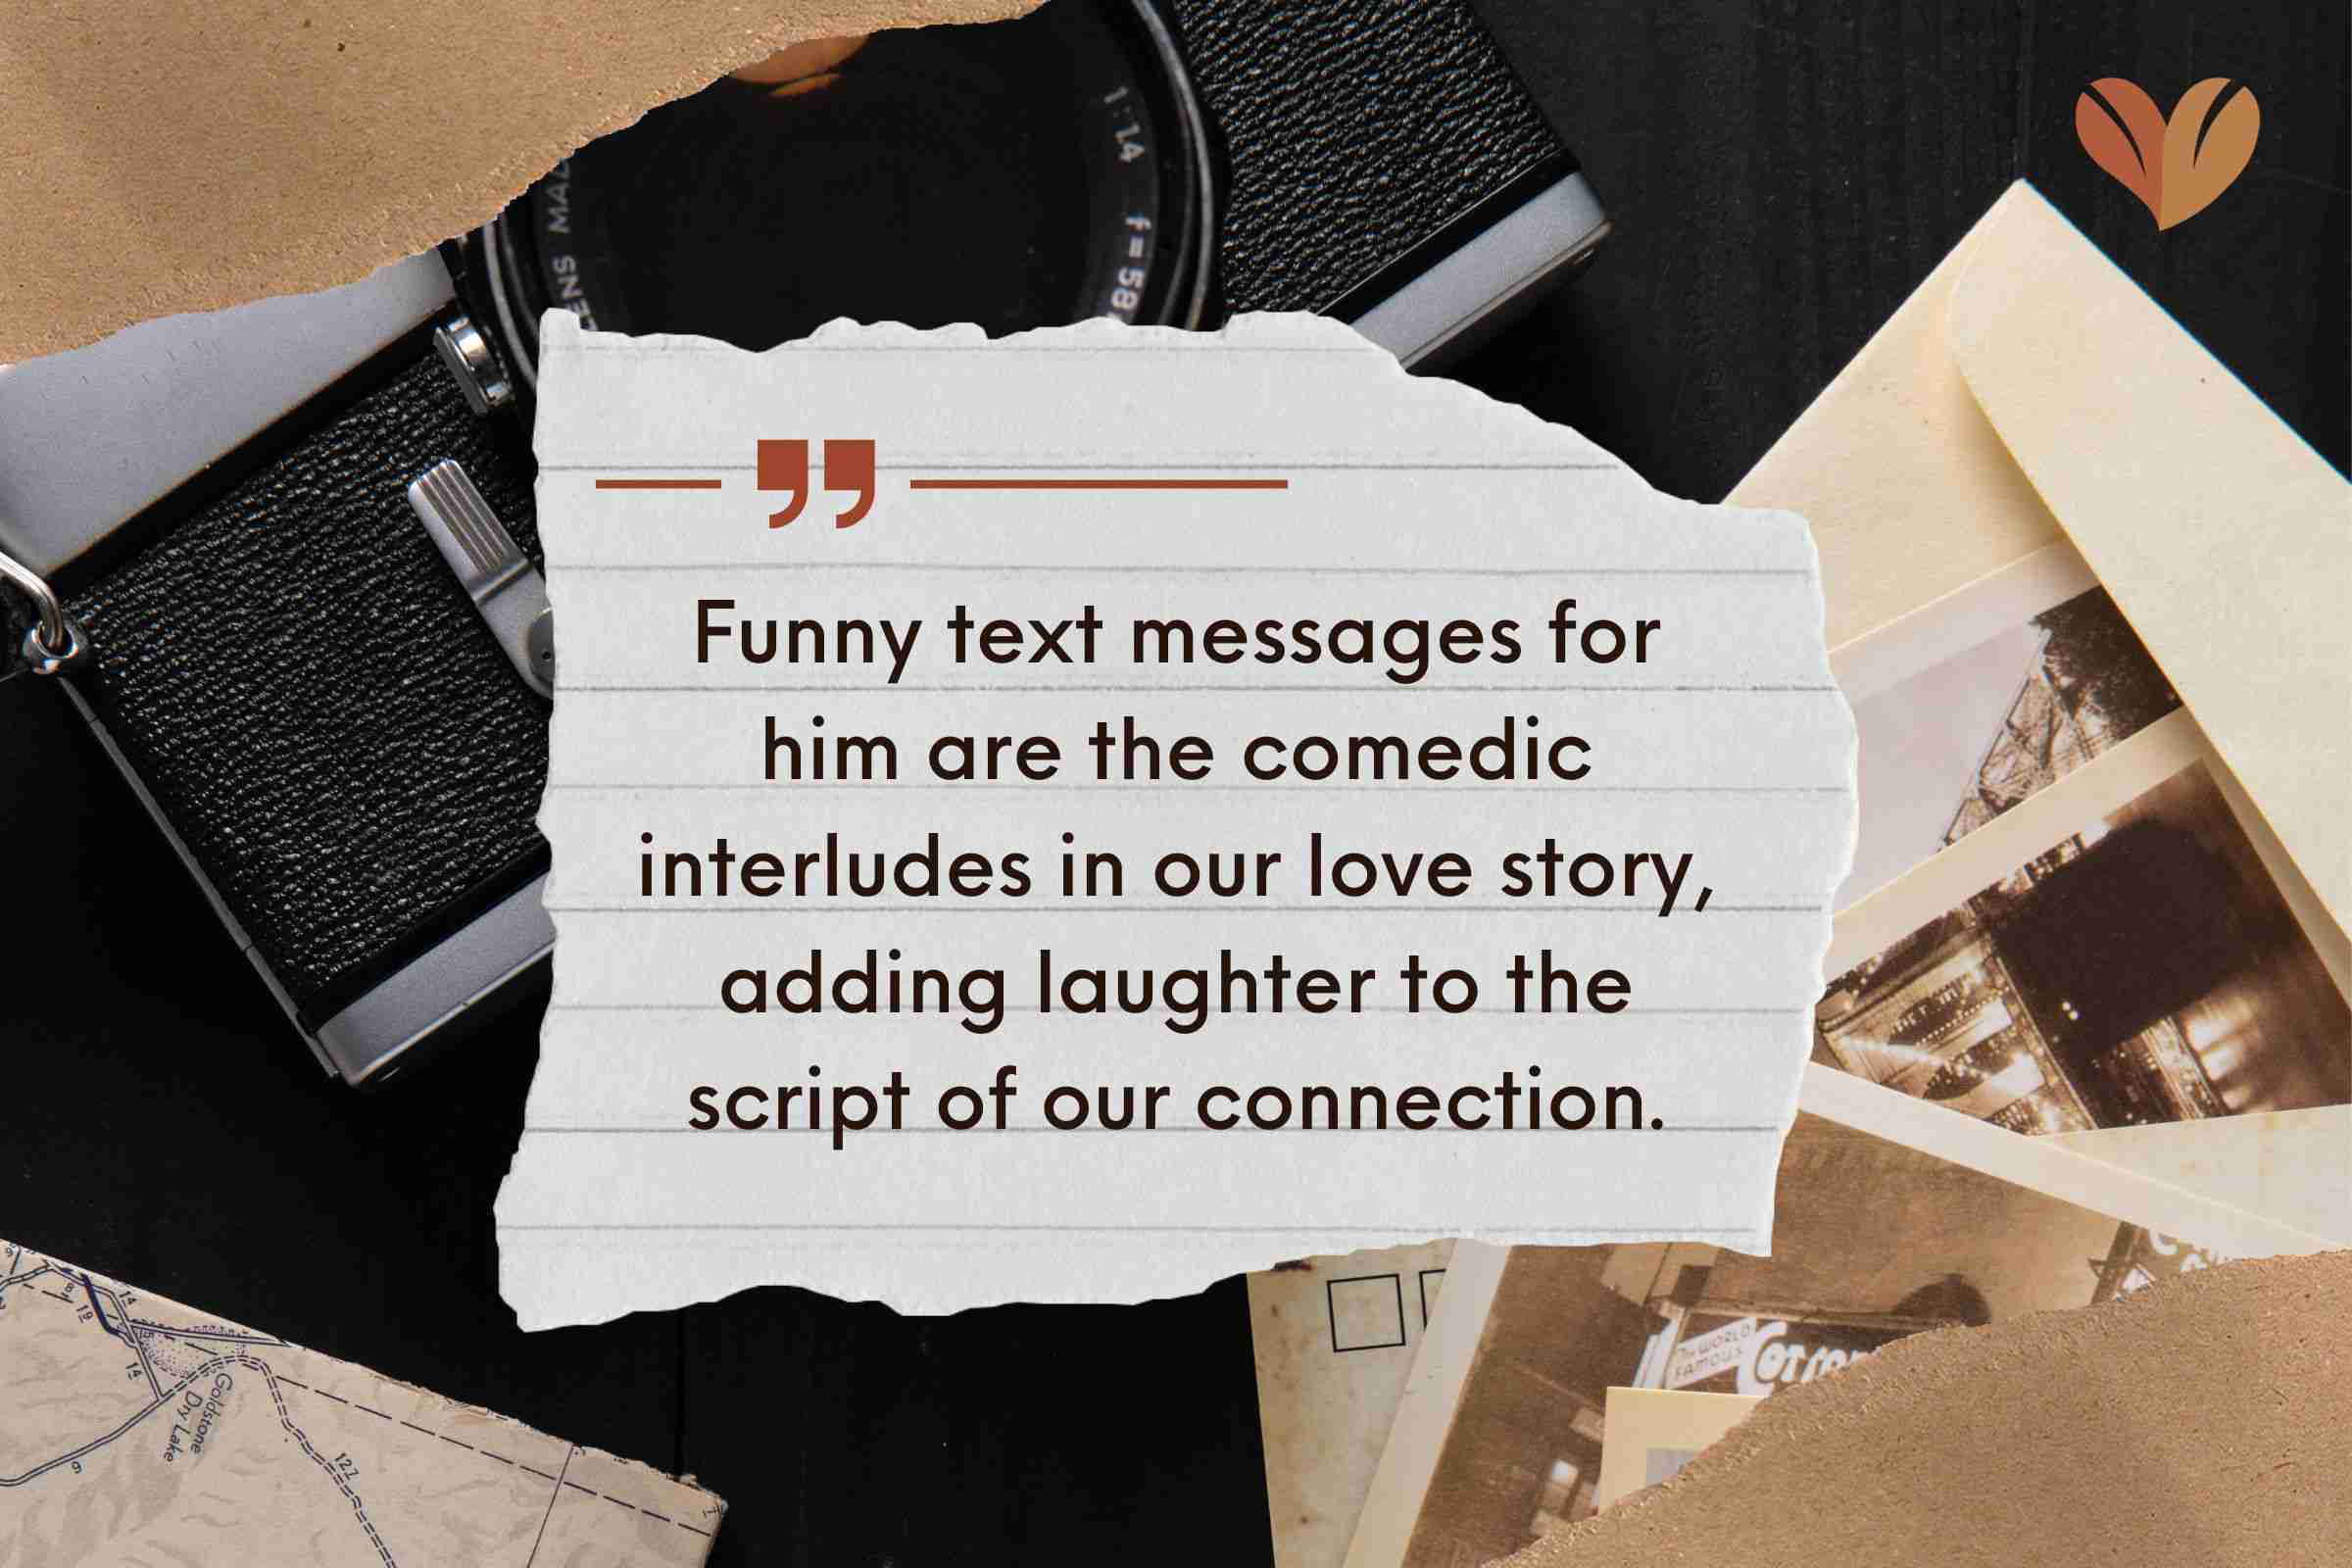 Funny text messages for him are the comedic interludes in our love story, adding laughter to the script of our connection.